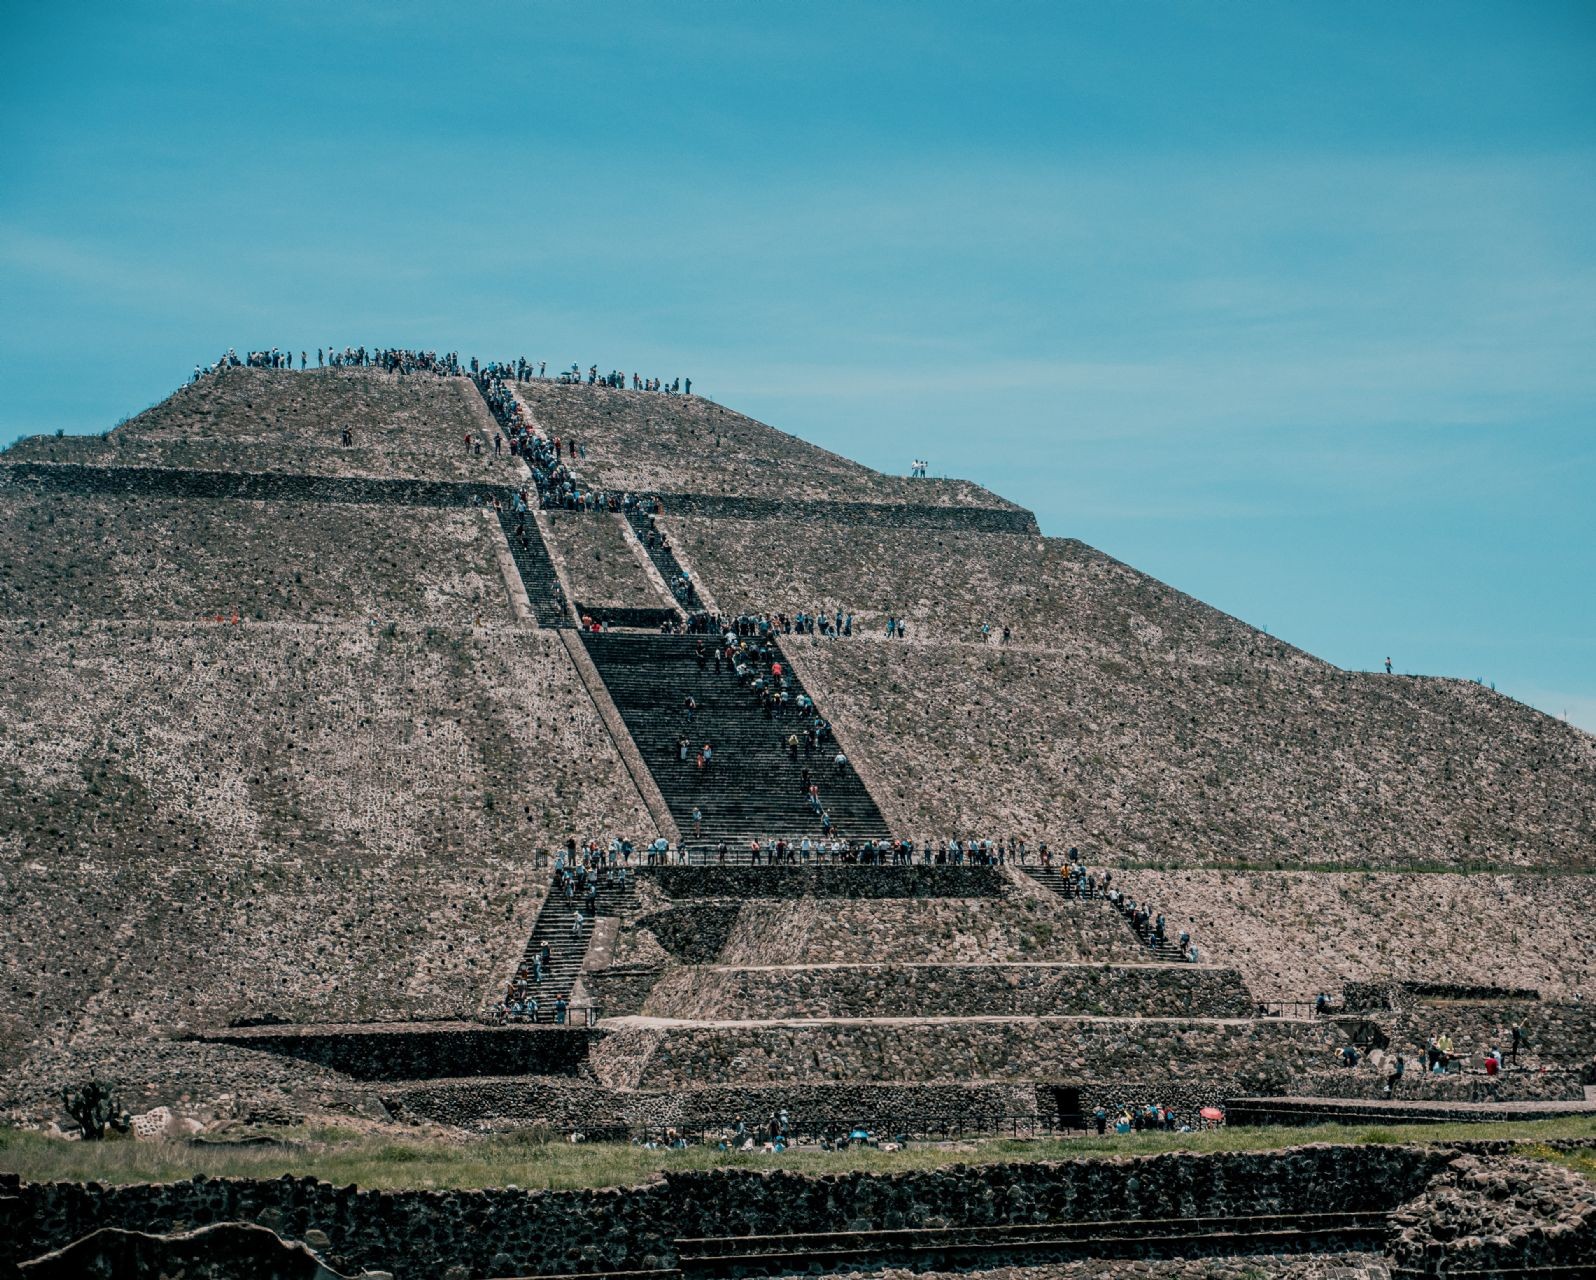 Mexico City Tours to Teotihuacan: Detailed Description of the Monuments